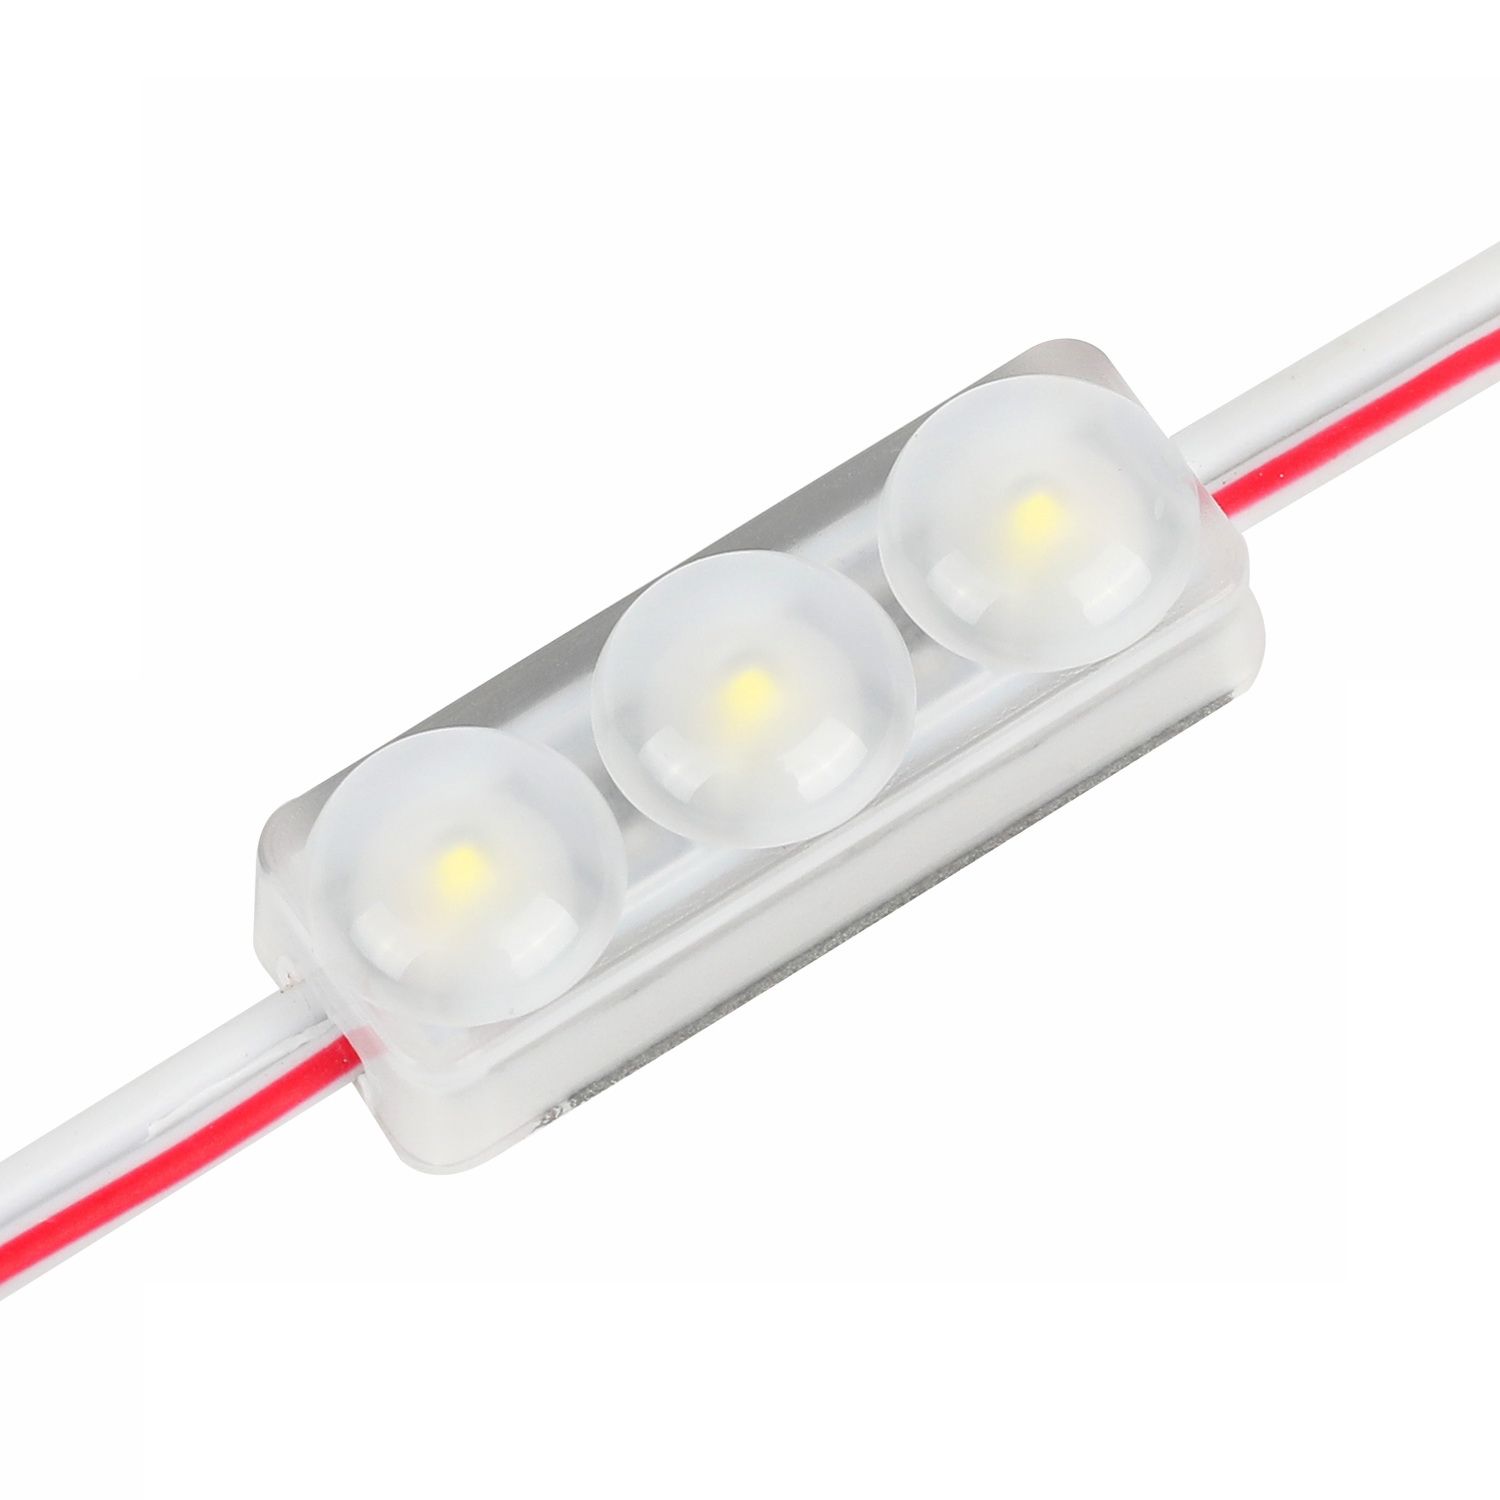 Anniv Below] Mini LED Module SMD2835 3 White Light 55lm DC 12V For Signage IP65 Tiny LED USA Warehouse MF703 From Cmlampled, $0.25 | DHgate.Com